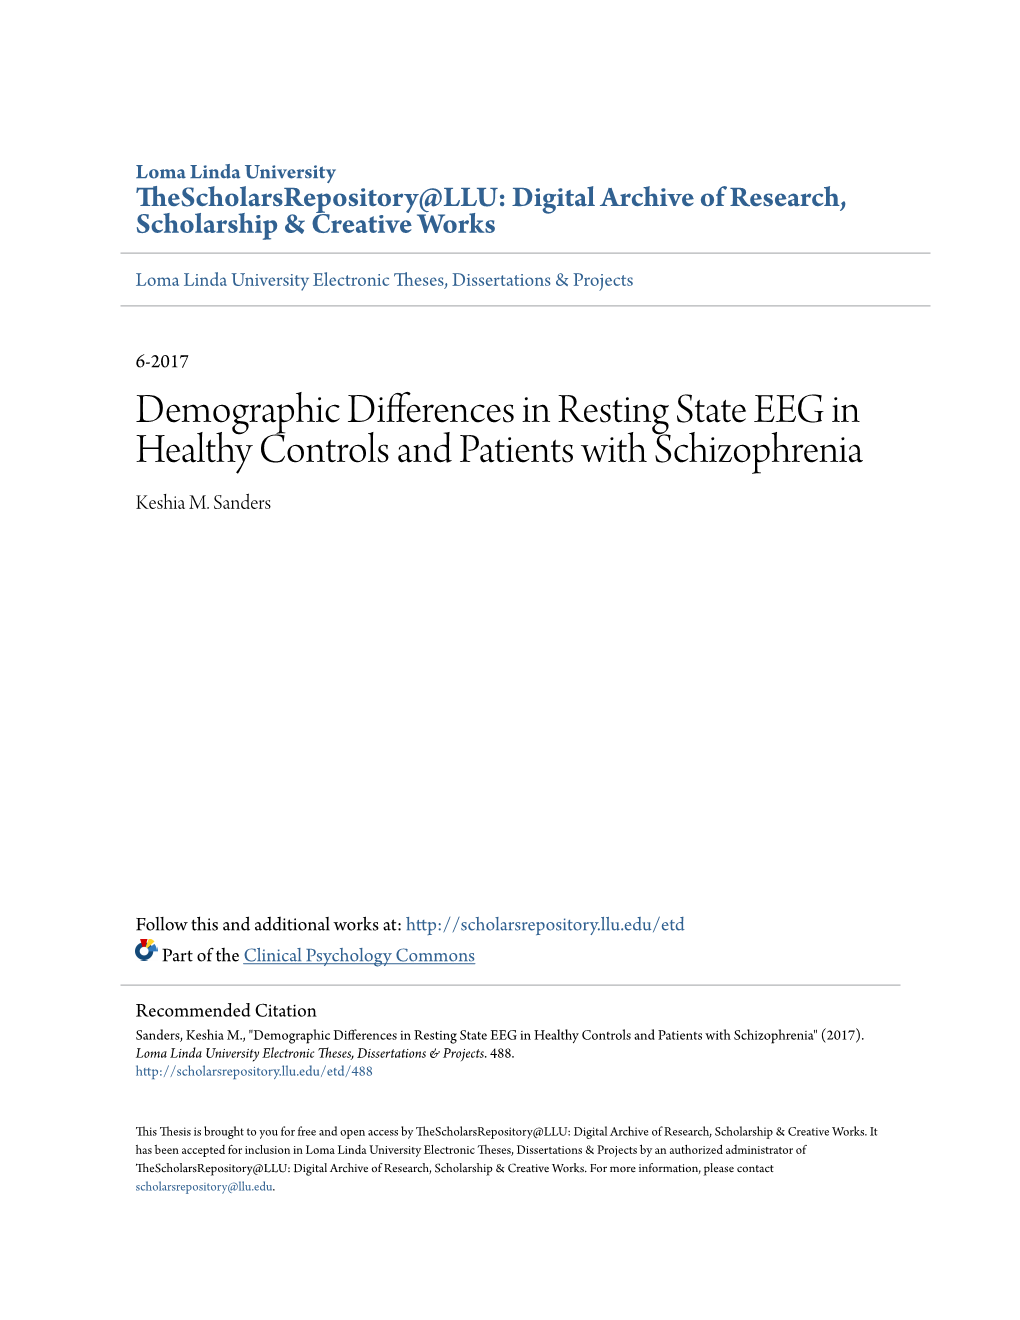 Demographic Differences in Resting State EEG in Healthy Controls and Patients with Schizophrenia Keshia M